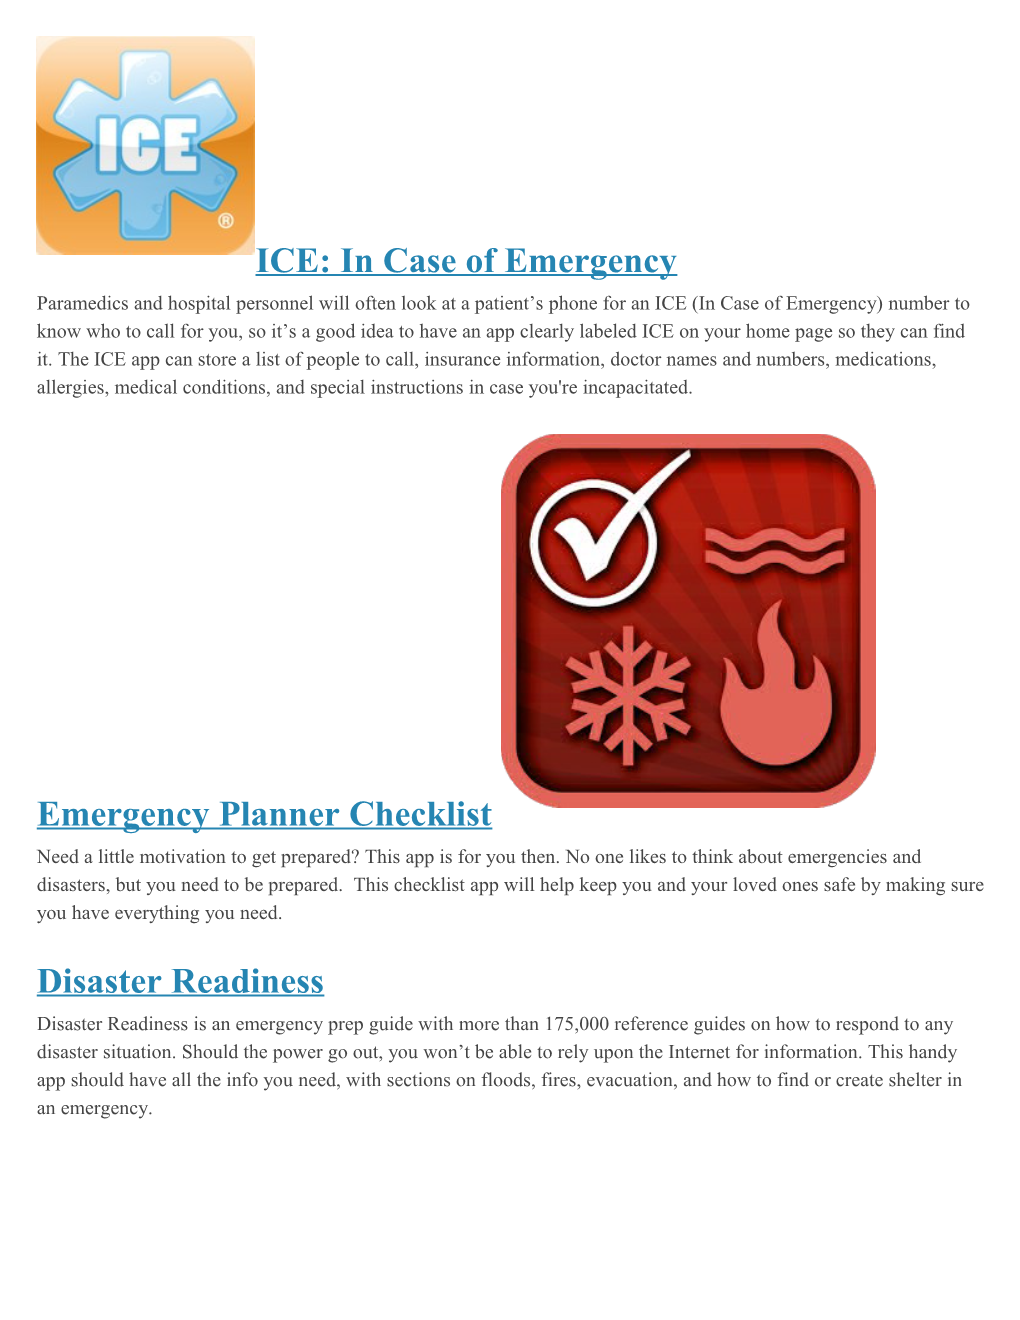 50 Emergency Apps: Turn Your Phone Into a Life-Savingdevice!